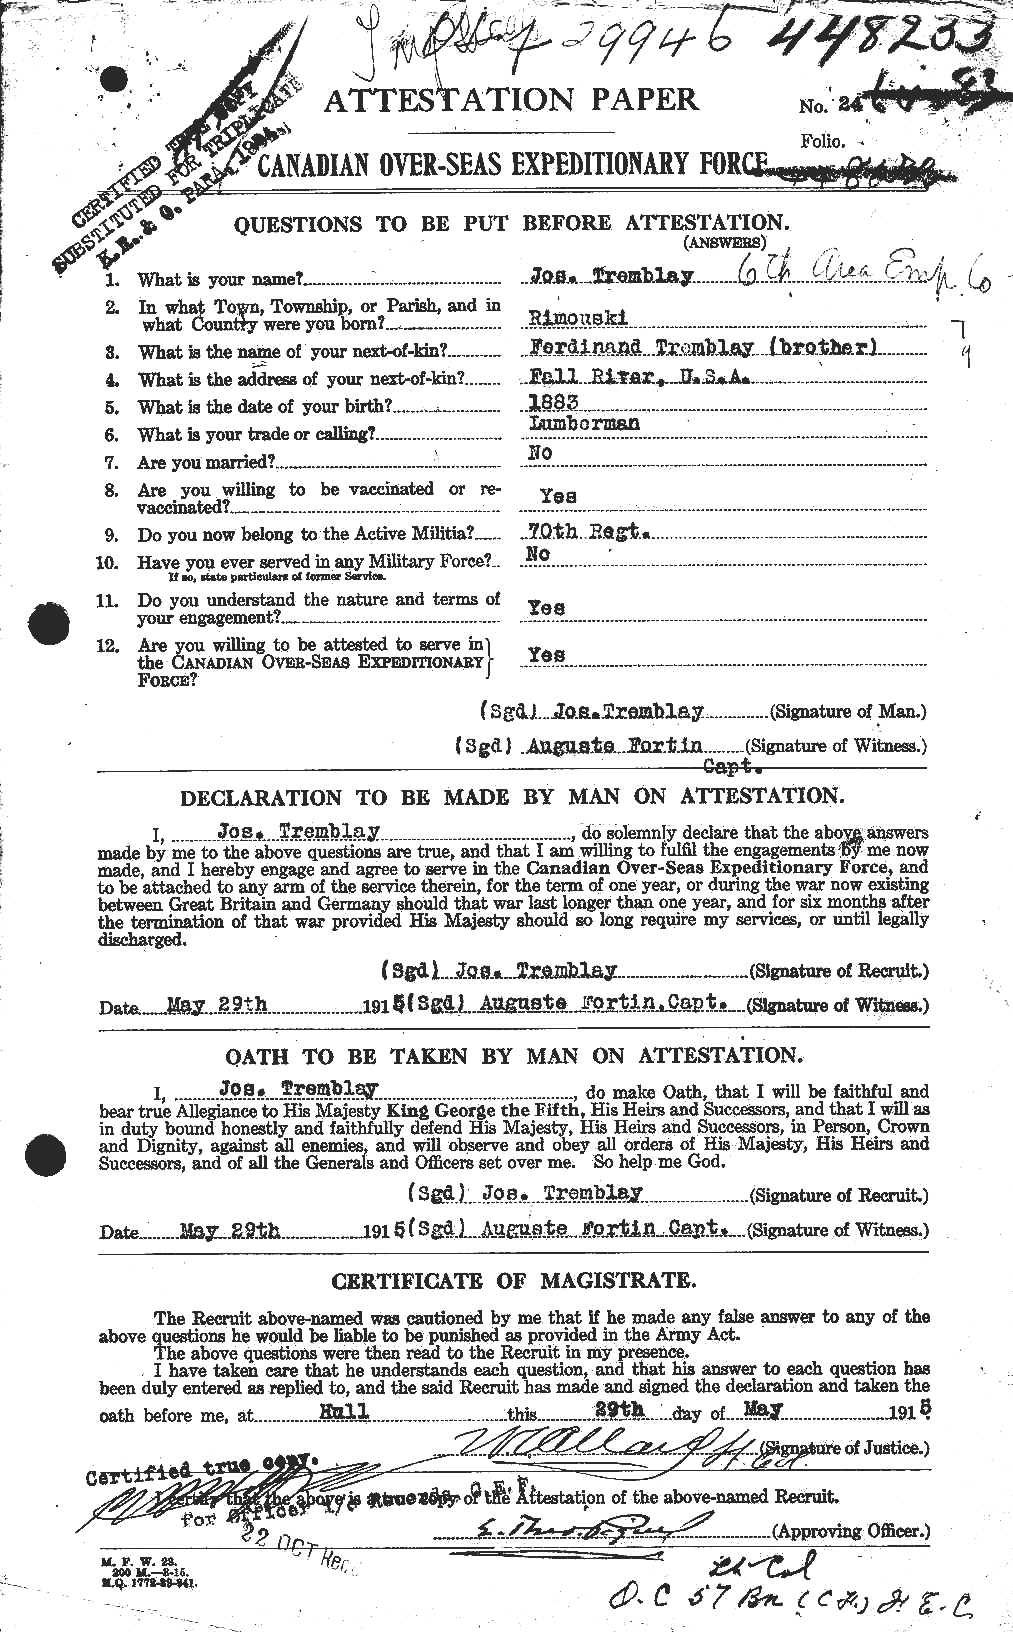 Personnel Records of the First World War - CEF 639119a